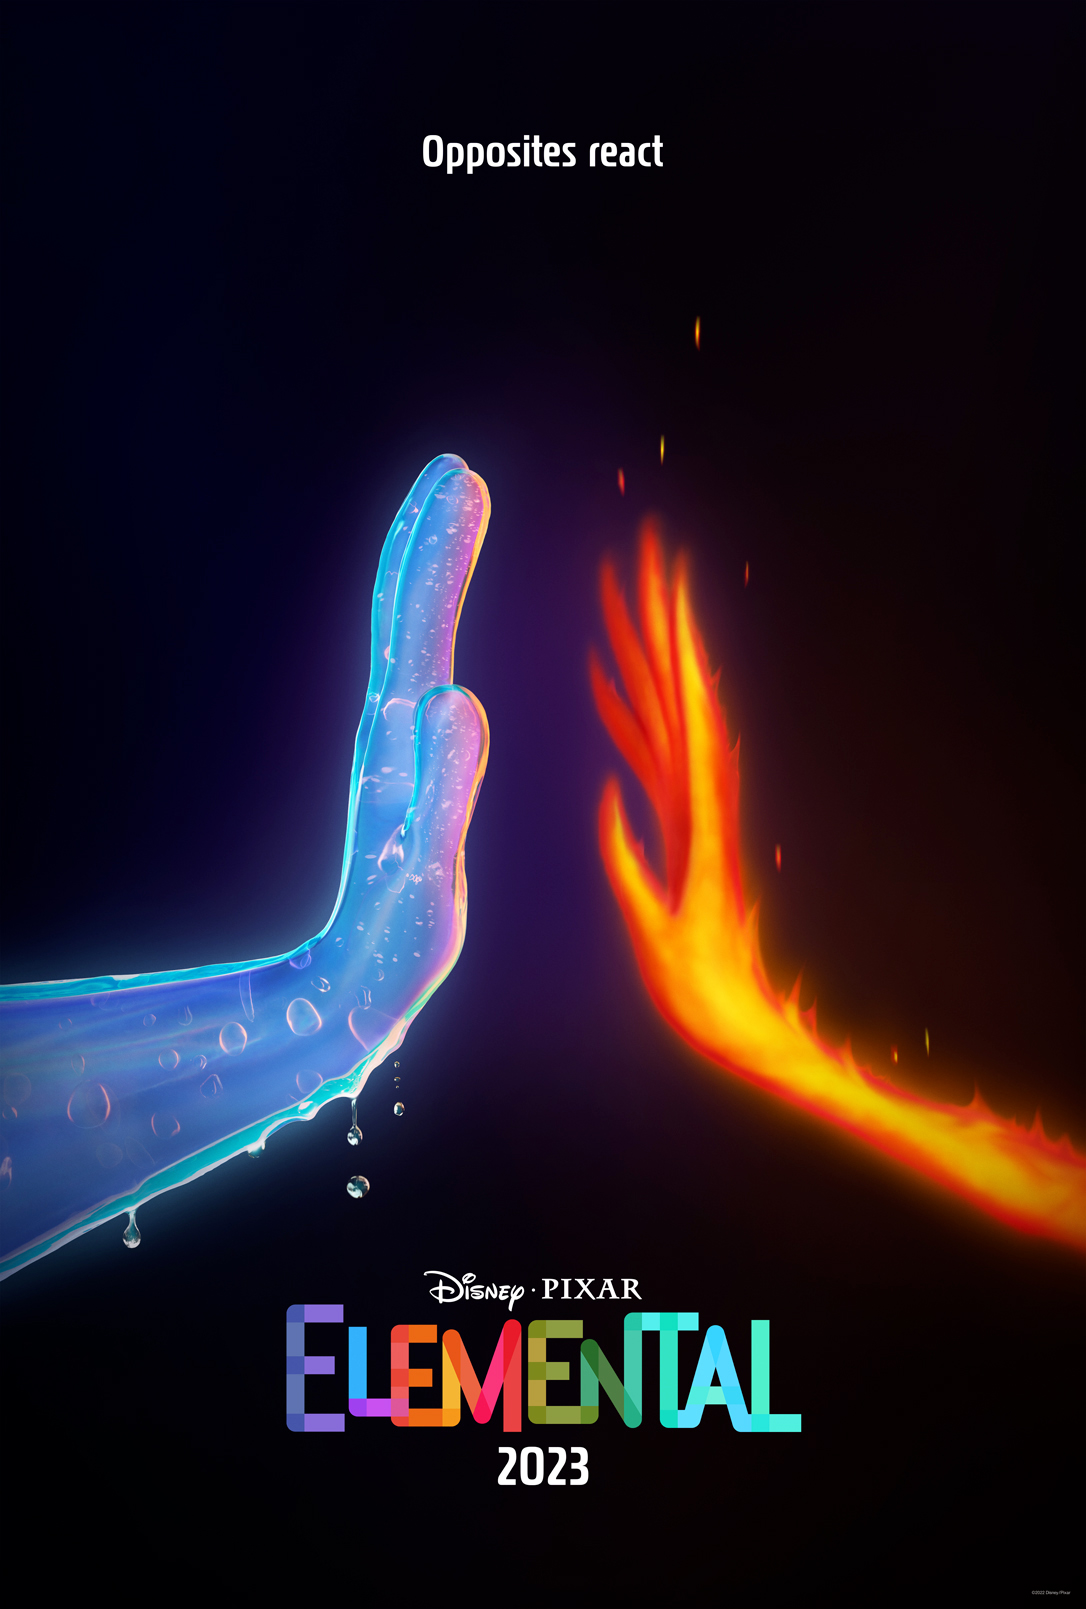 Disney D23 out this #D23Expo Exclusive Poster for Disney and Pixar's Elemental. See the movie only in theaters June 2023!